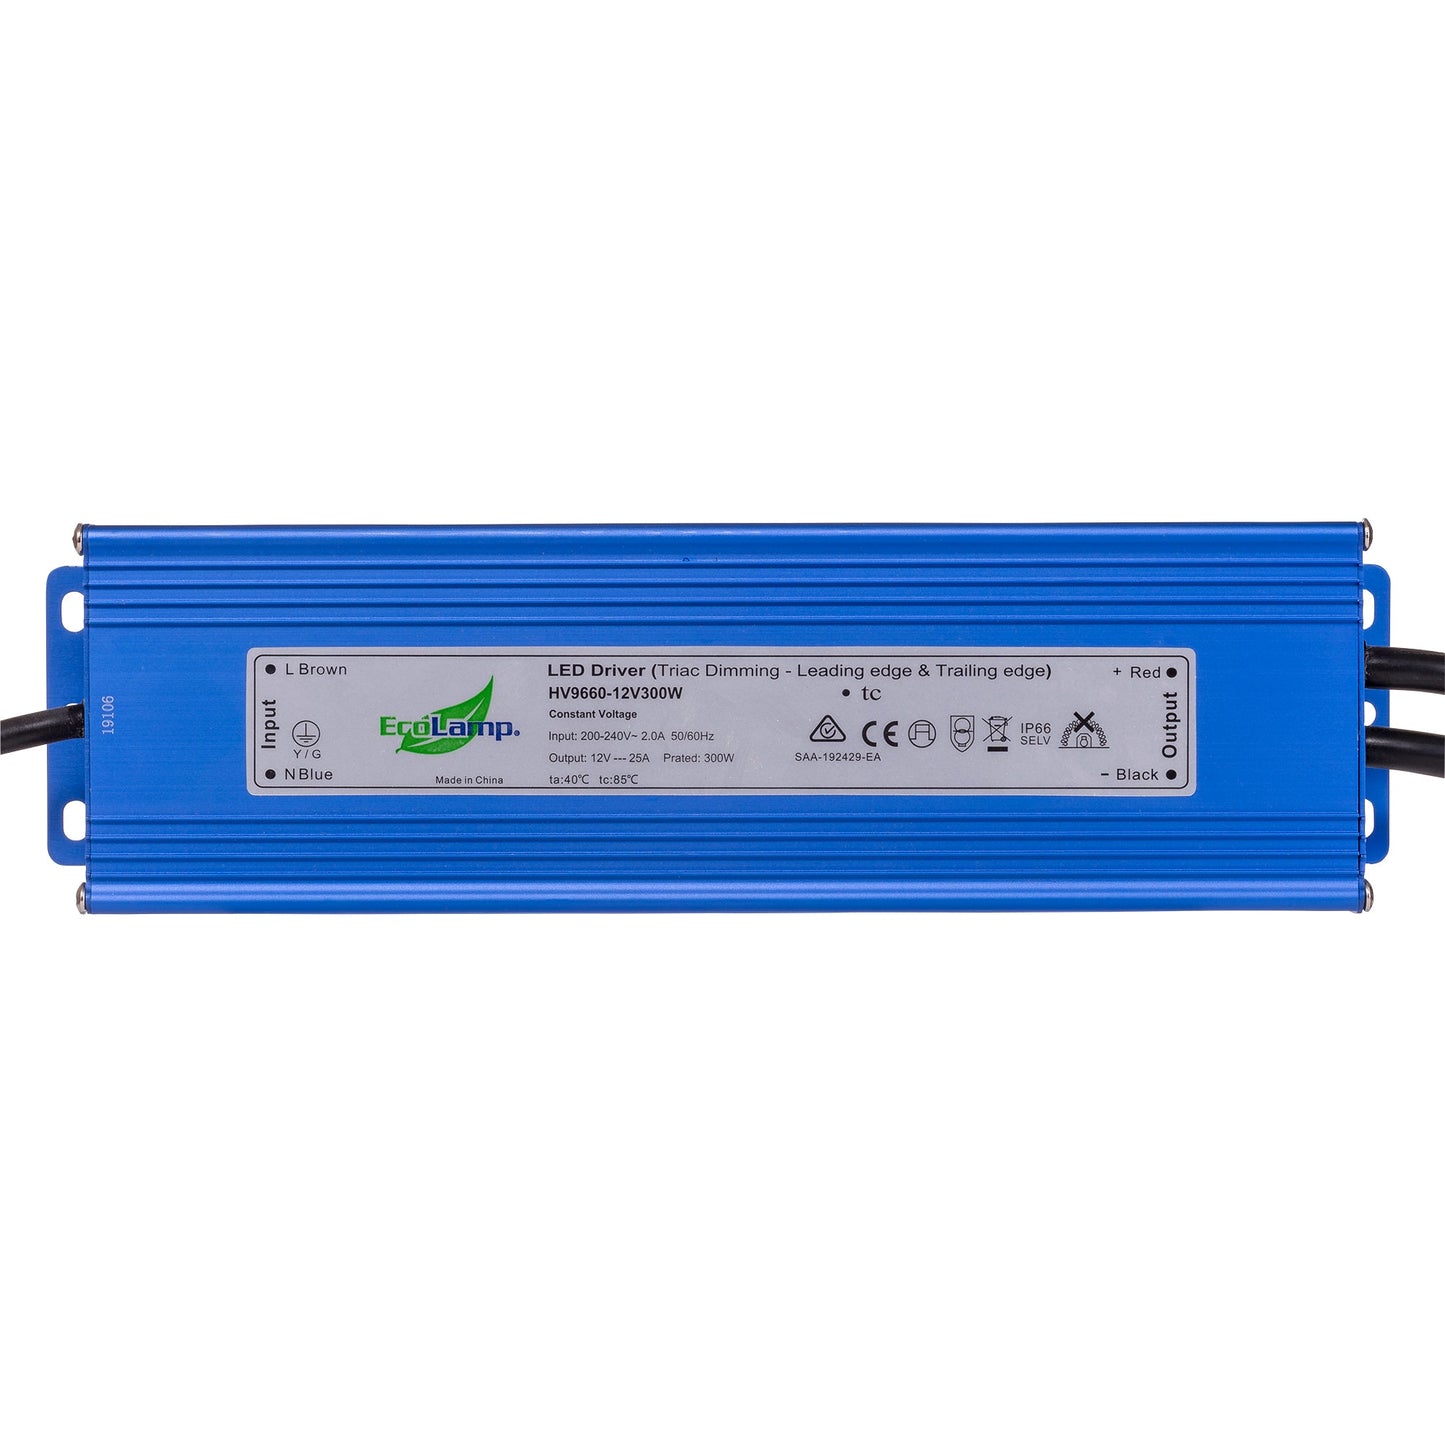 Hv9660-300w - 300w Weatherproof Dimmable LED Driver